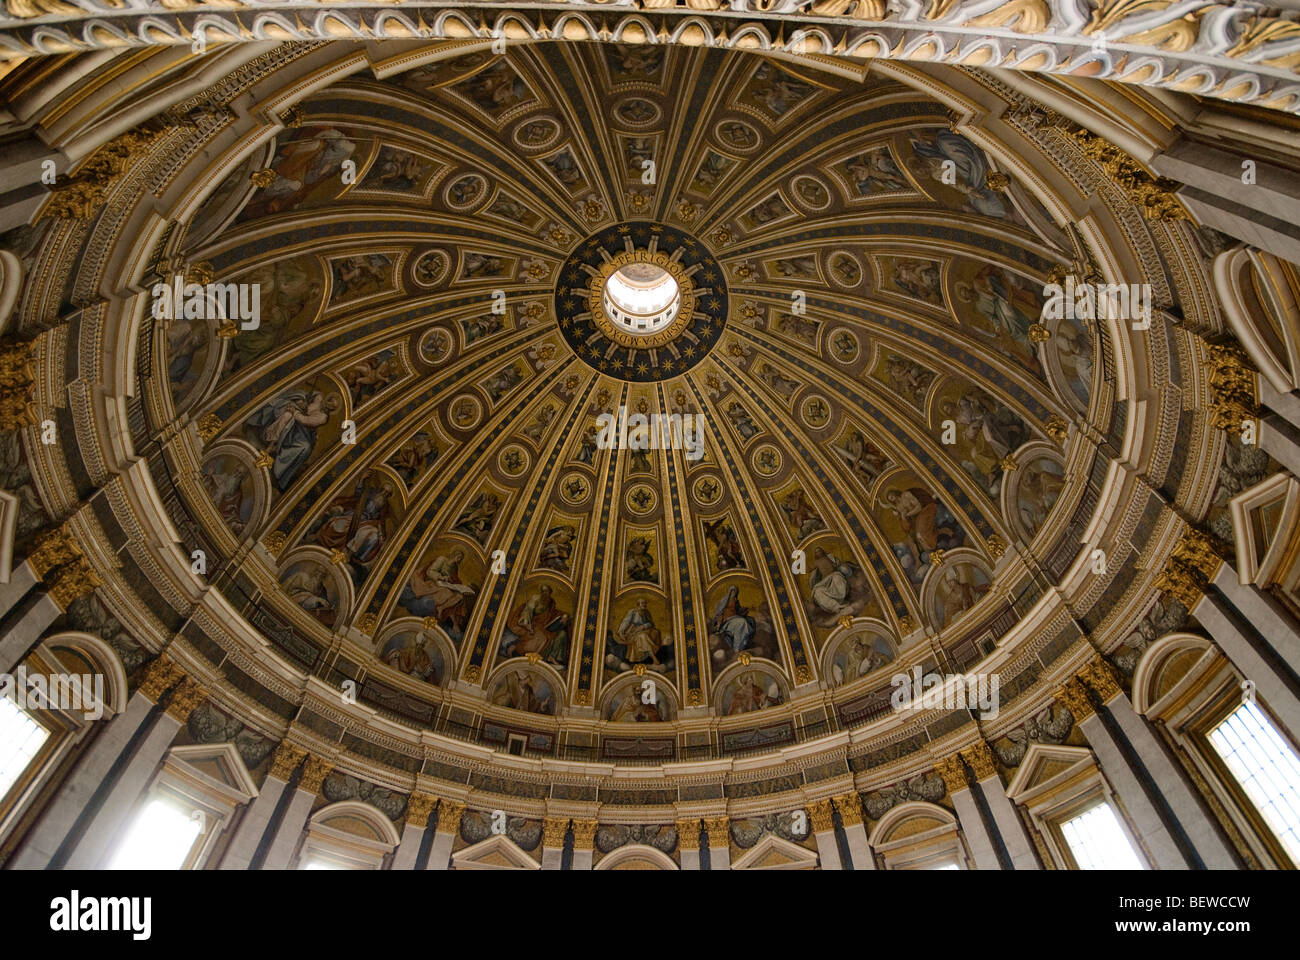 Inside view of the dome of St. Peters Basilica, Rome, Vatican City, view from below Stock Photo